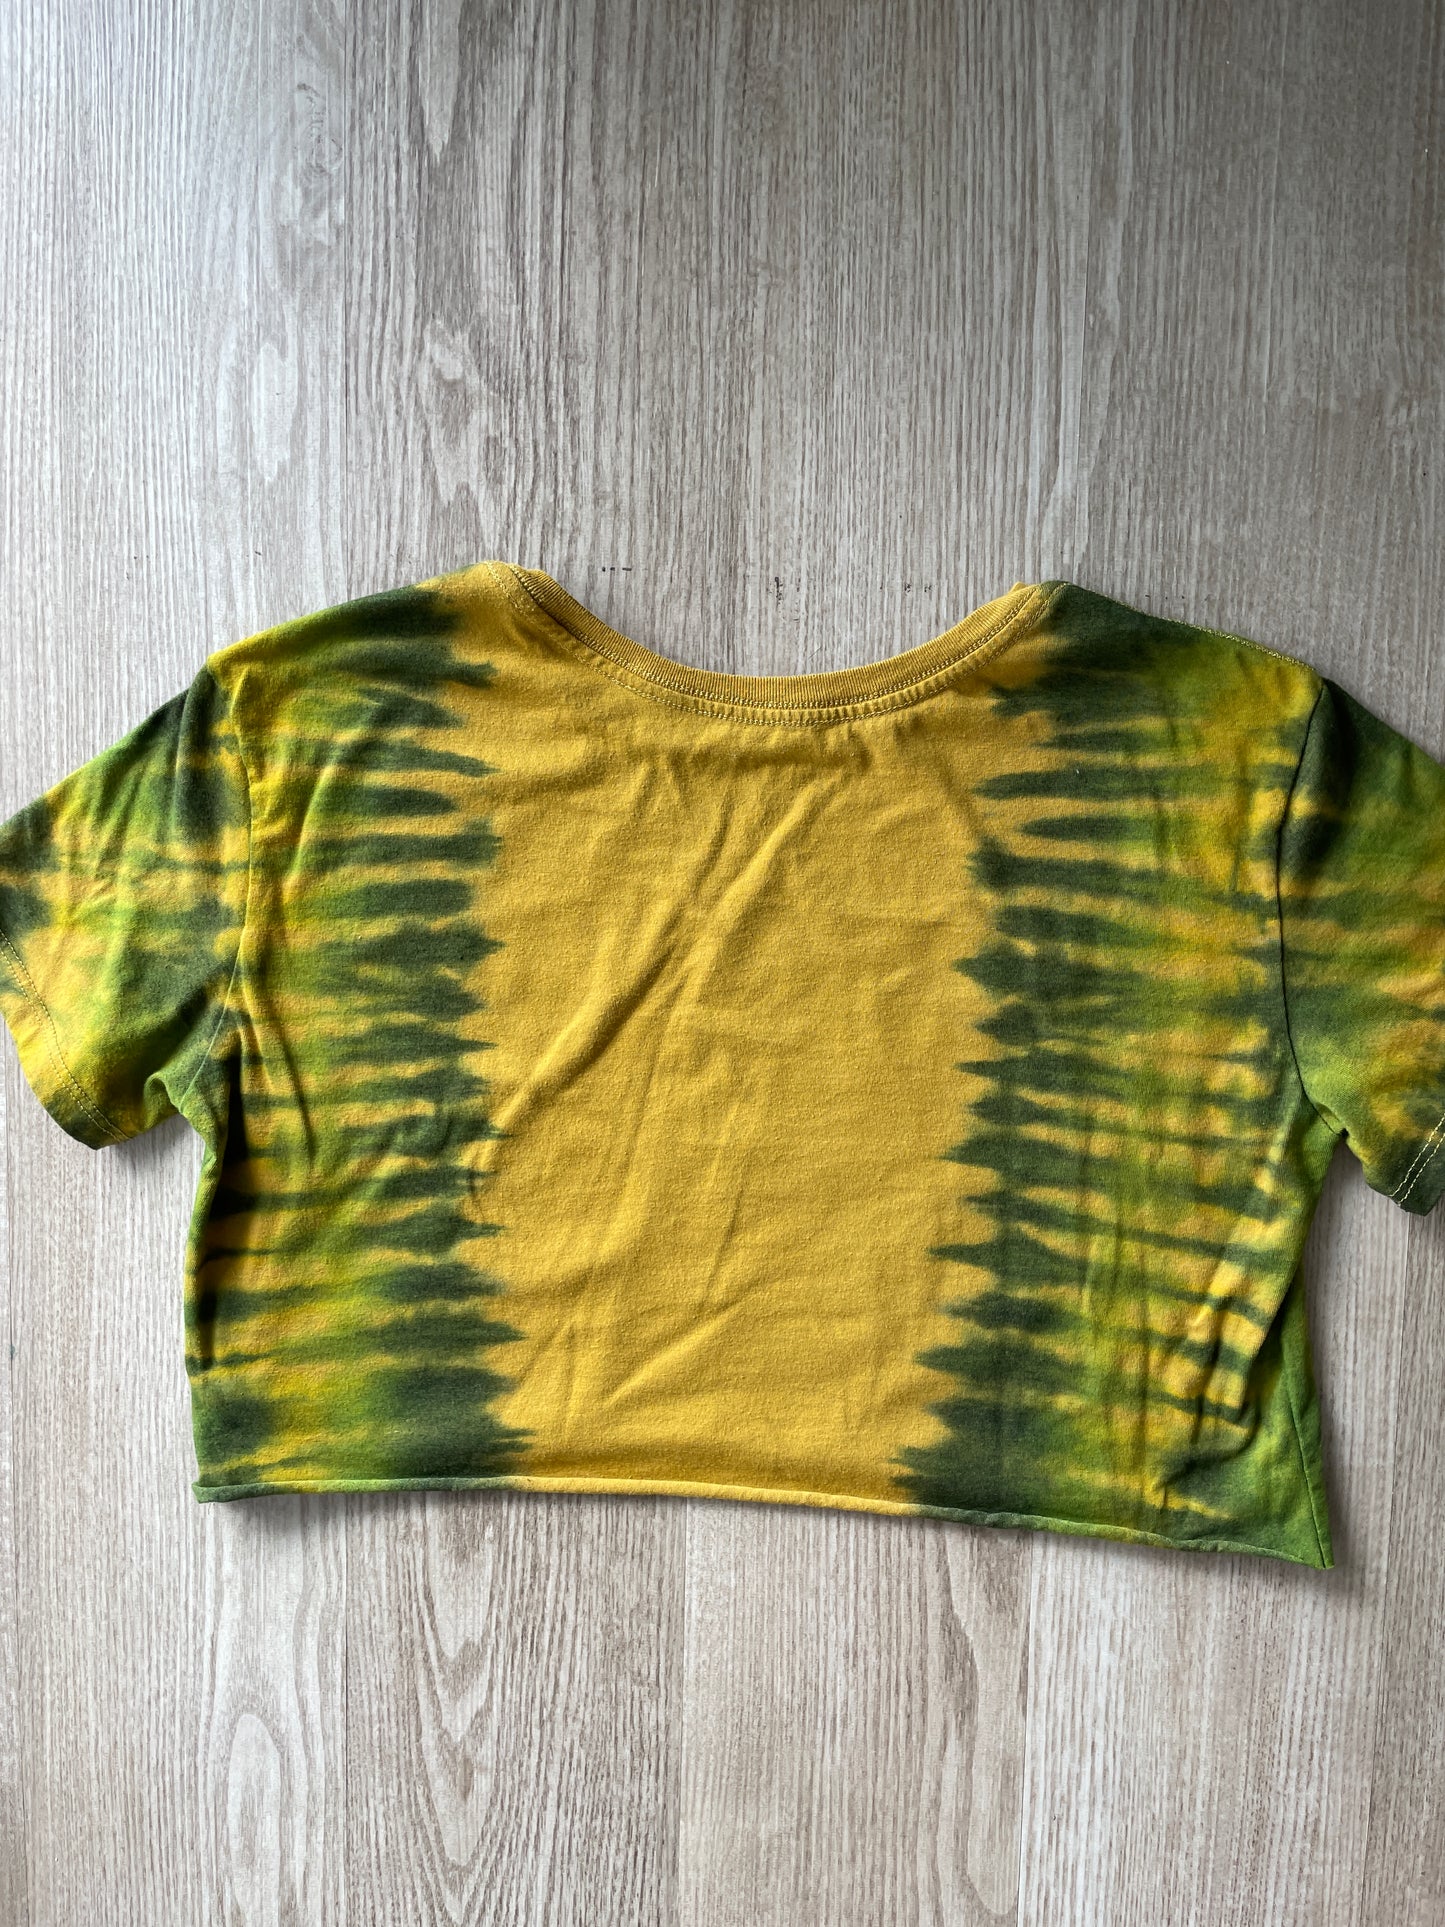 XL Women’s Cacti and Desert Plants Handmade Tie Dye Crop Top | One-Of-a-Kind Yellow and Green Pleated Short Sleeve Cropped T-Shirt